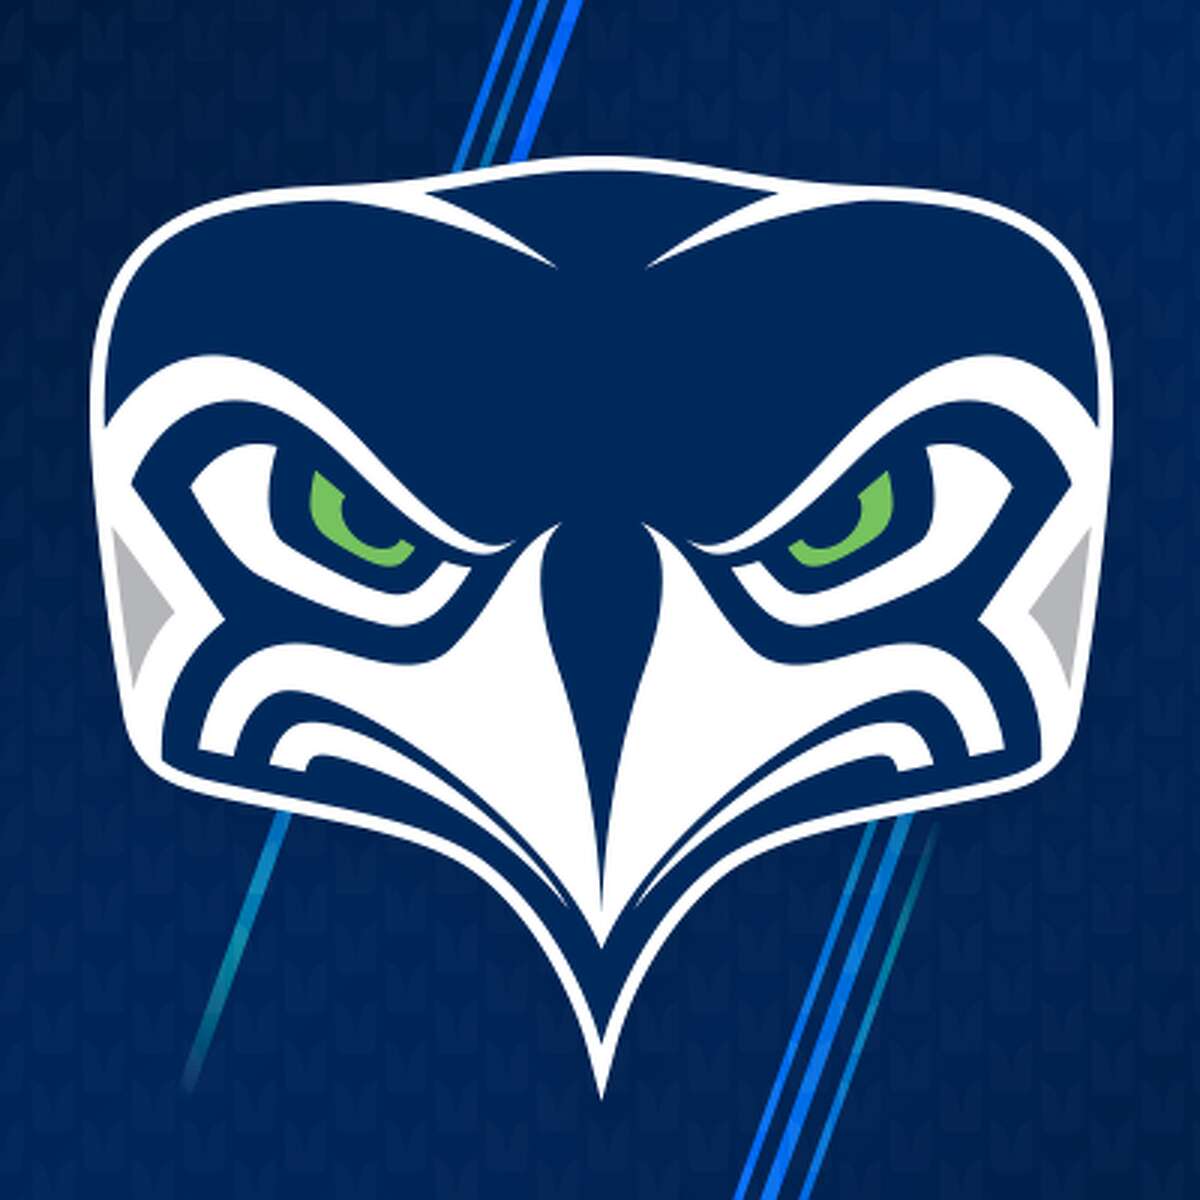 The Seahawks unveiled a new, front-facing logo on social media on Tuesday.